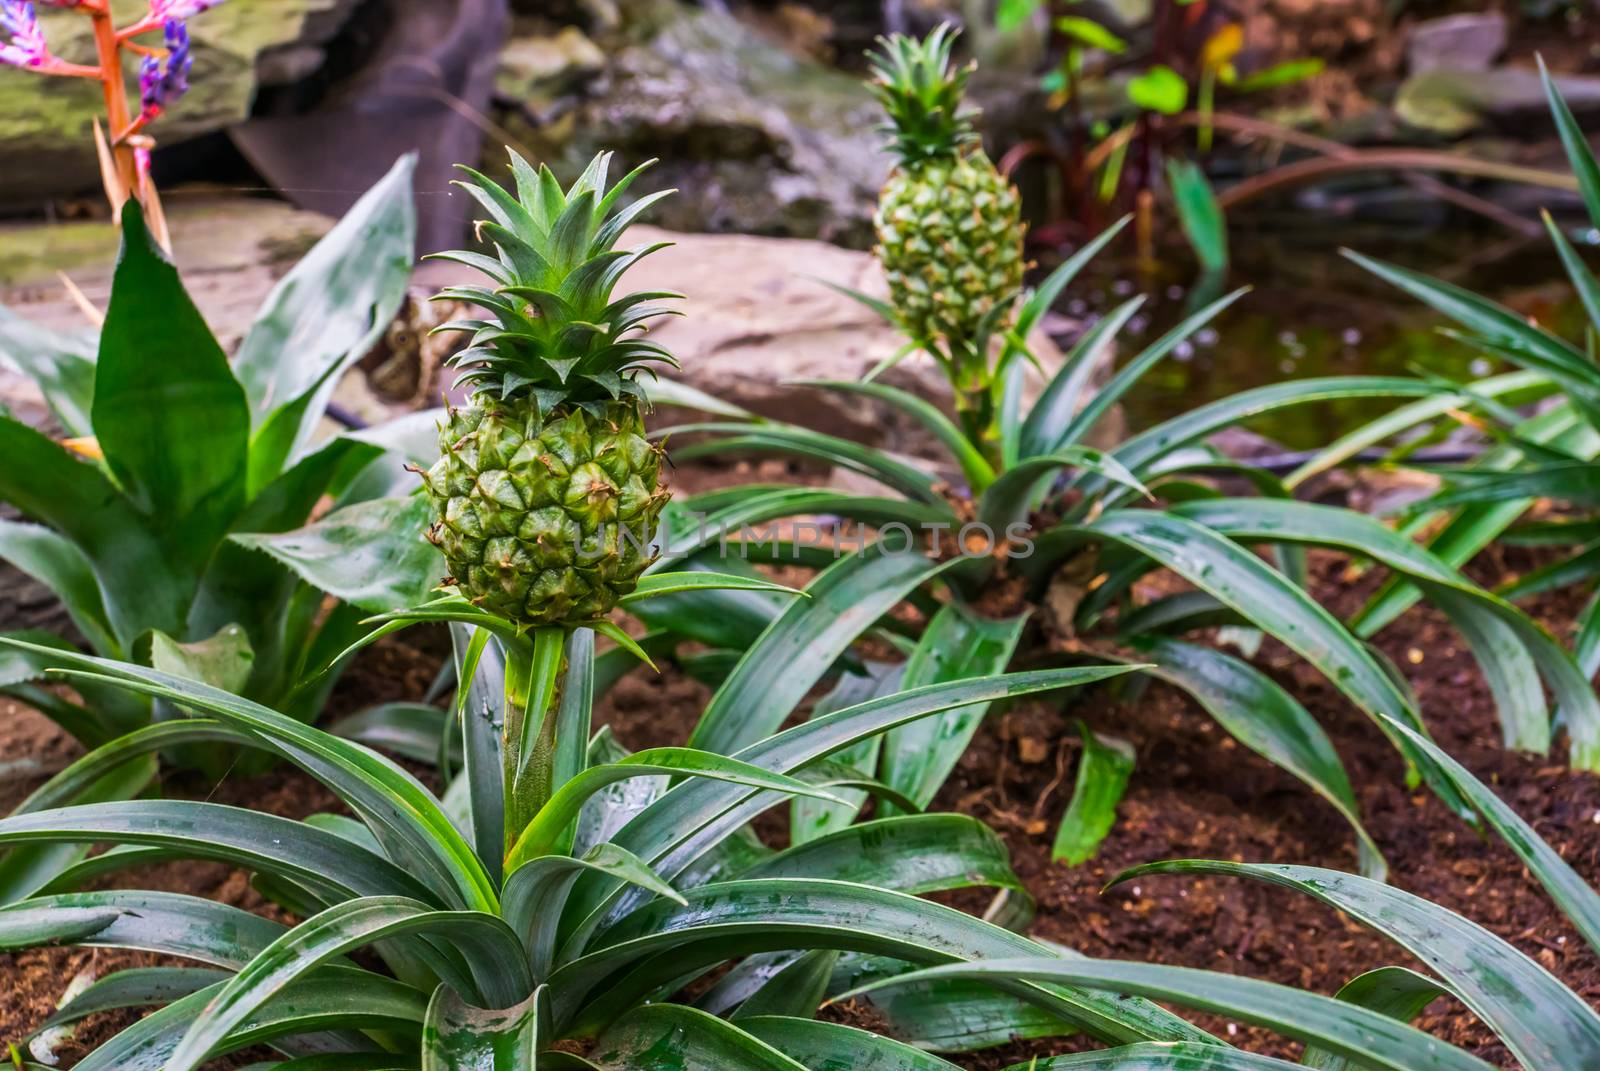 small pineapples growing on plants, tropical garden, popular exotic plant specie from South America by charlottebleijenberg